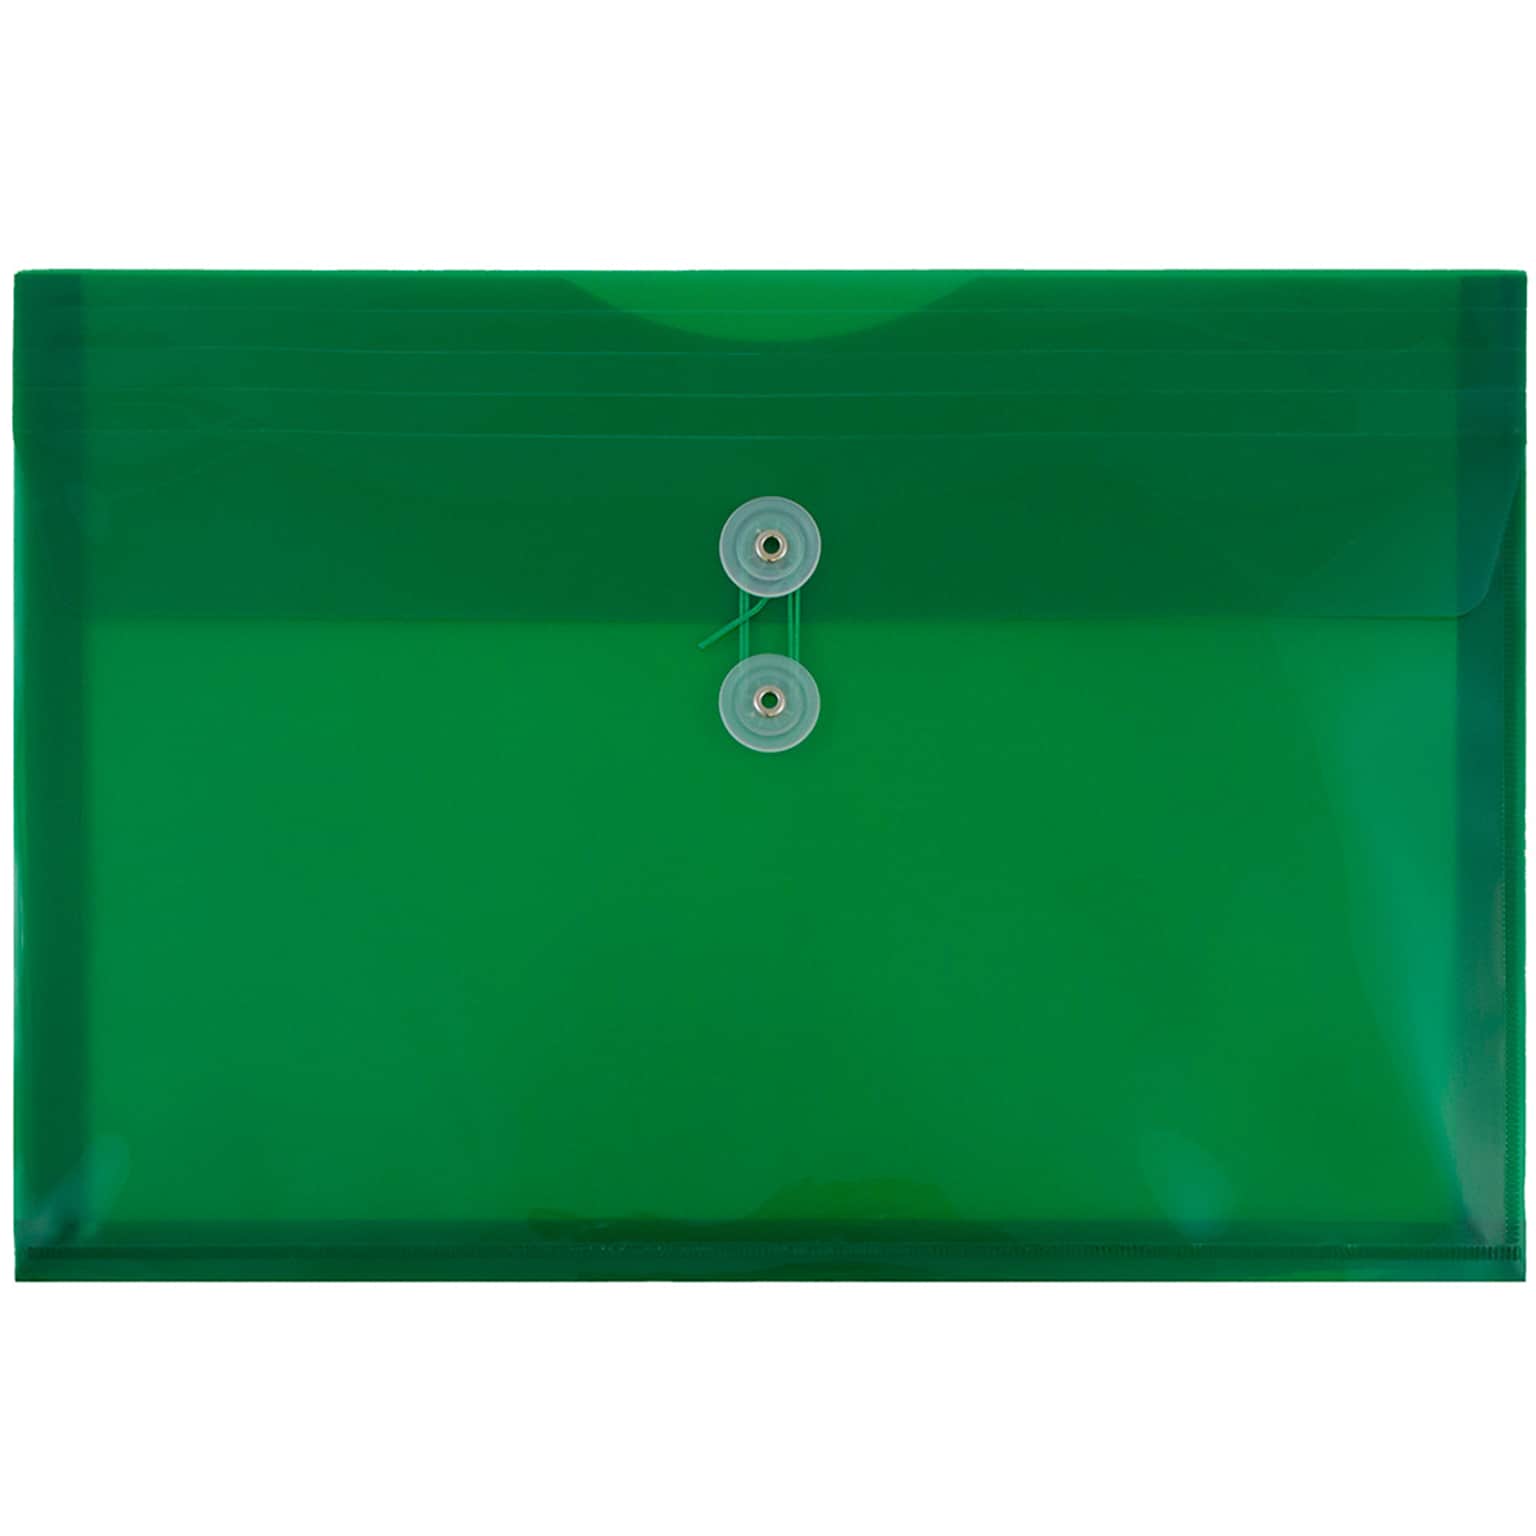 JAM Paper® Plastic Envelopes with Button and String Tie Closure, Legal Booklet, 9.75 x 14.5, Green Poly, 12/pack (219B1GR)